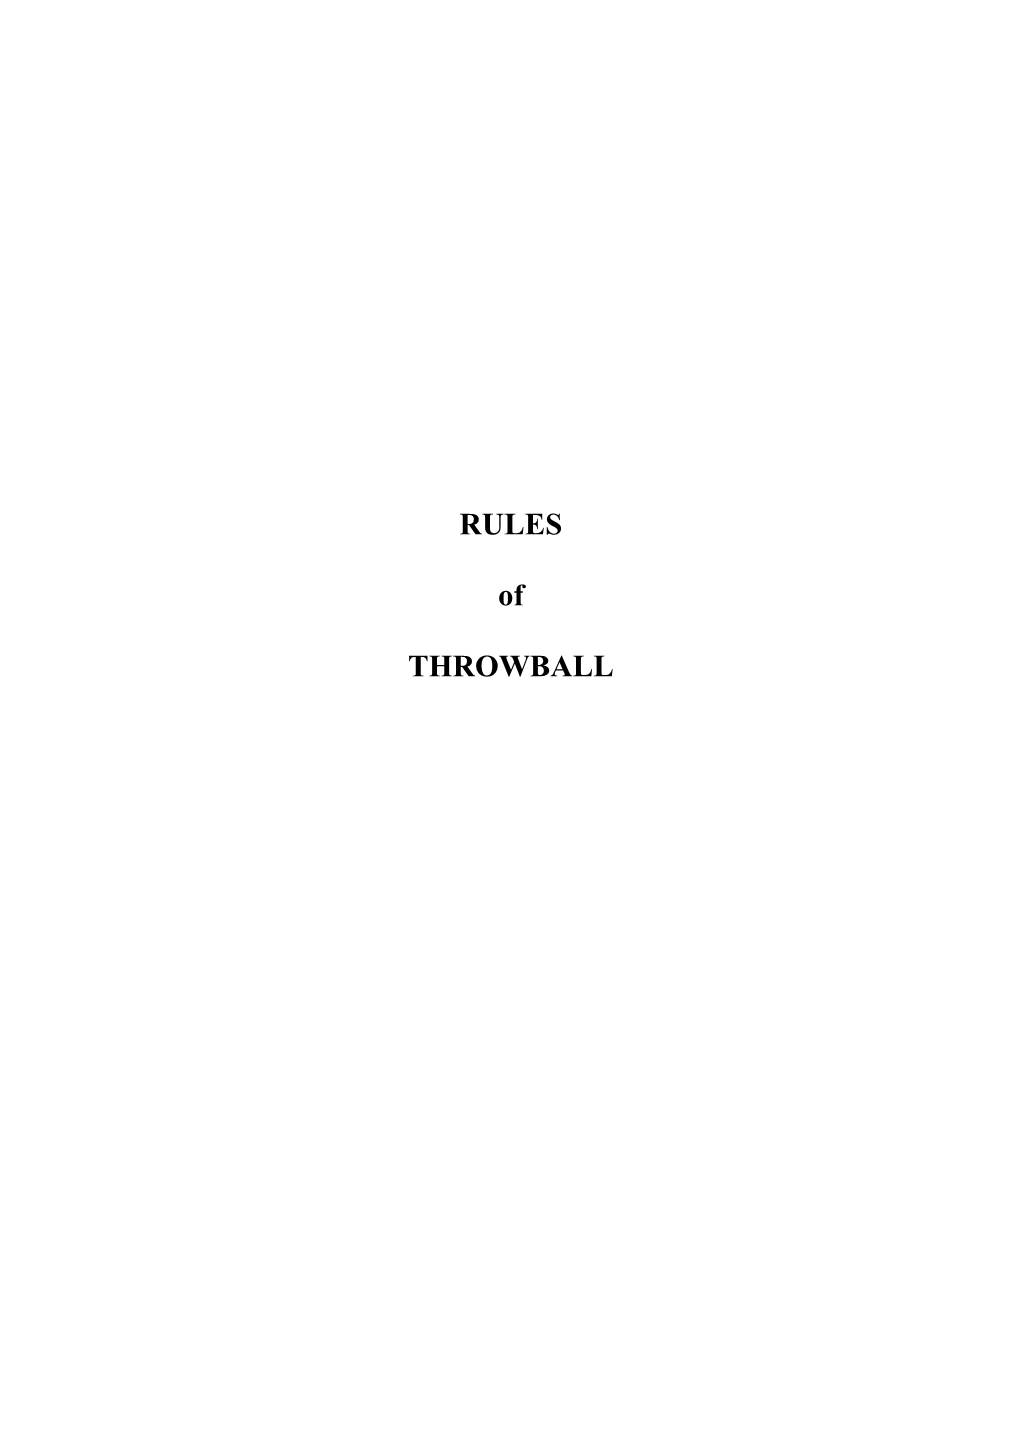 RULES of THROWBALL